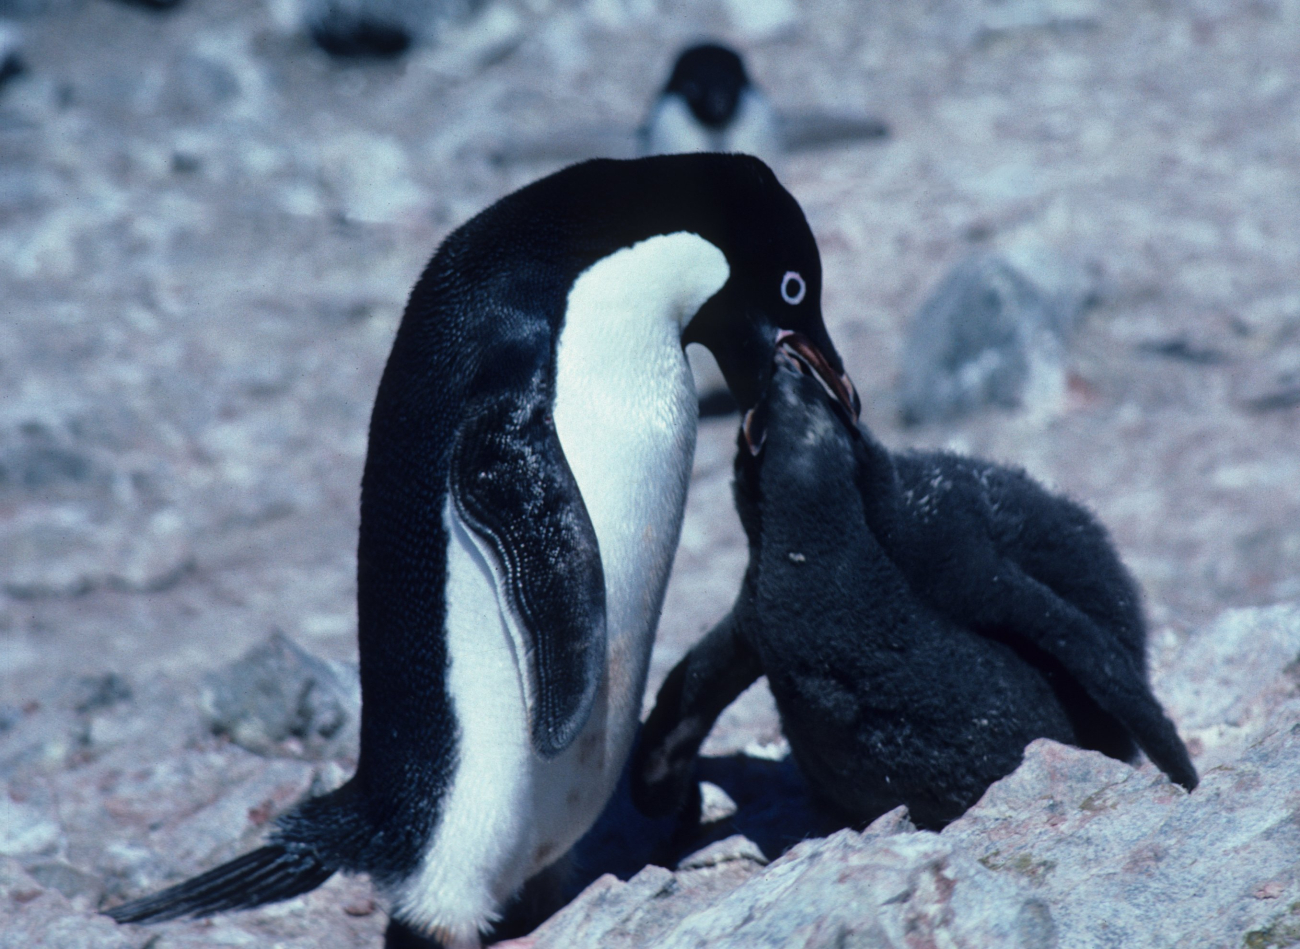 This Adelie penguin, recently returned from foraging, is feeding its chick,has been waiting for its parent's return for several days